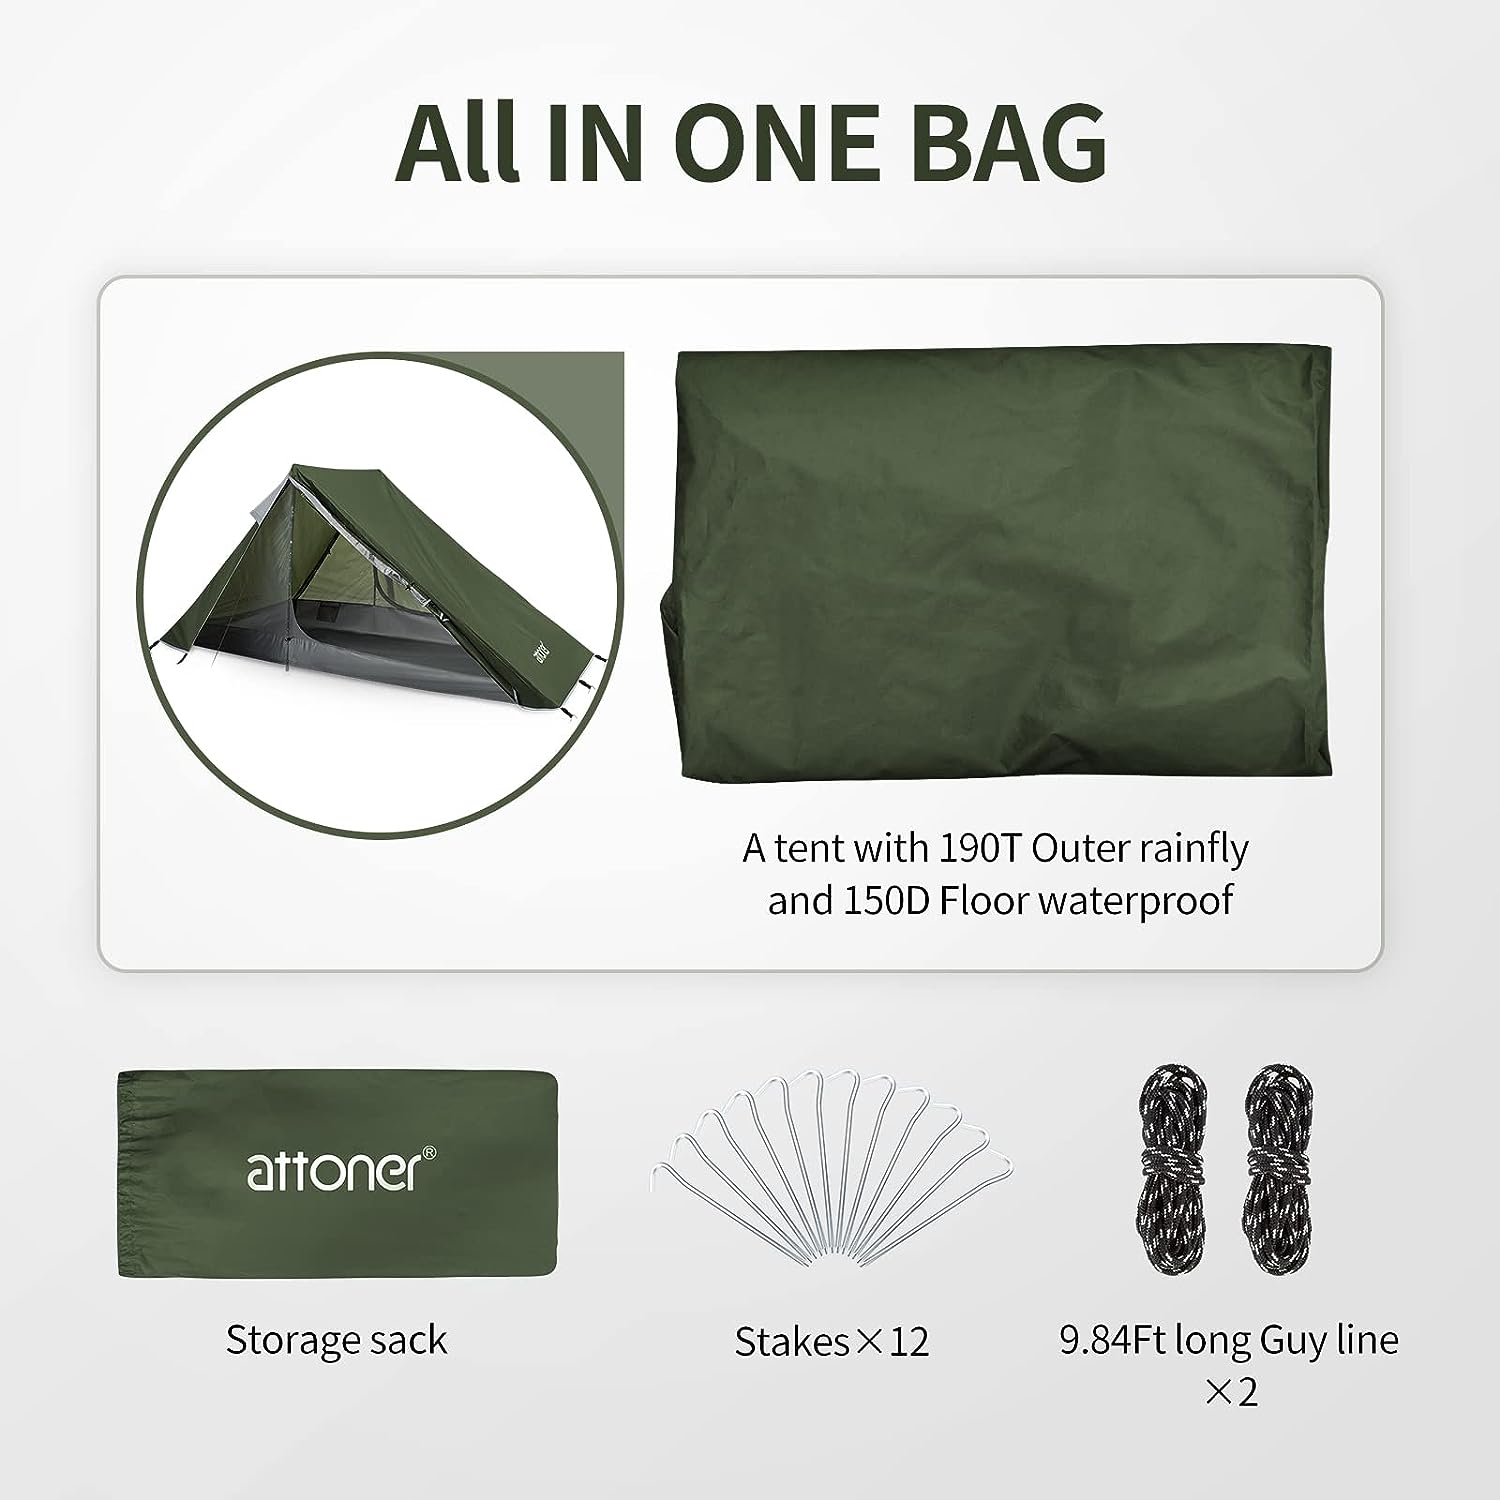 attoner ridge tent green polyester waterproof backpacking tent package